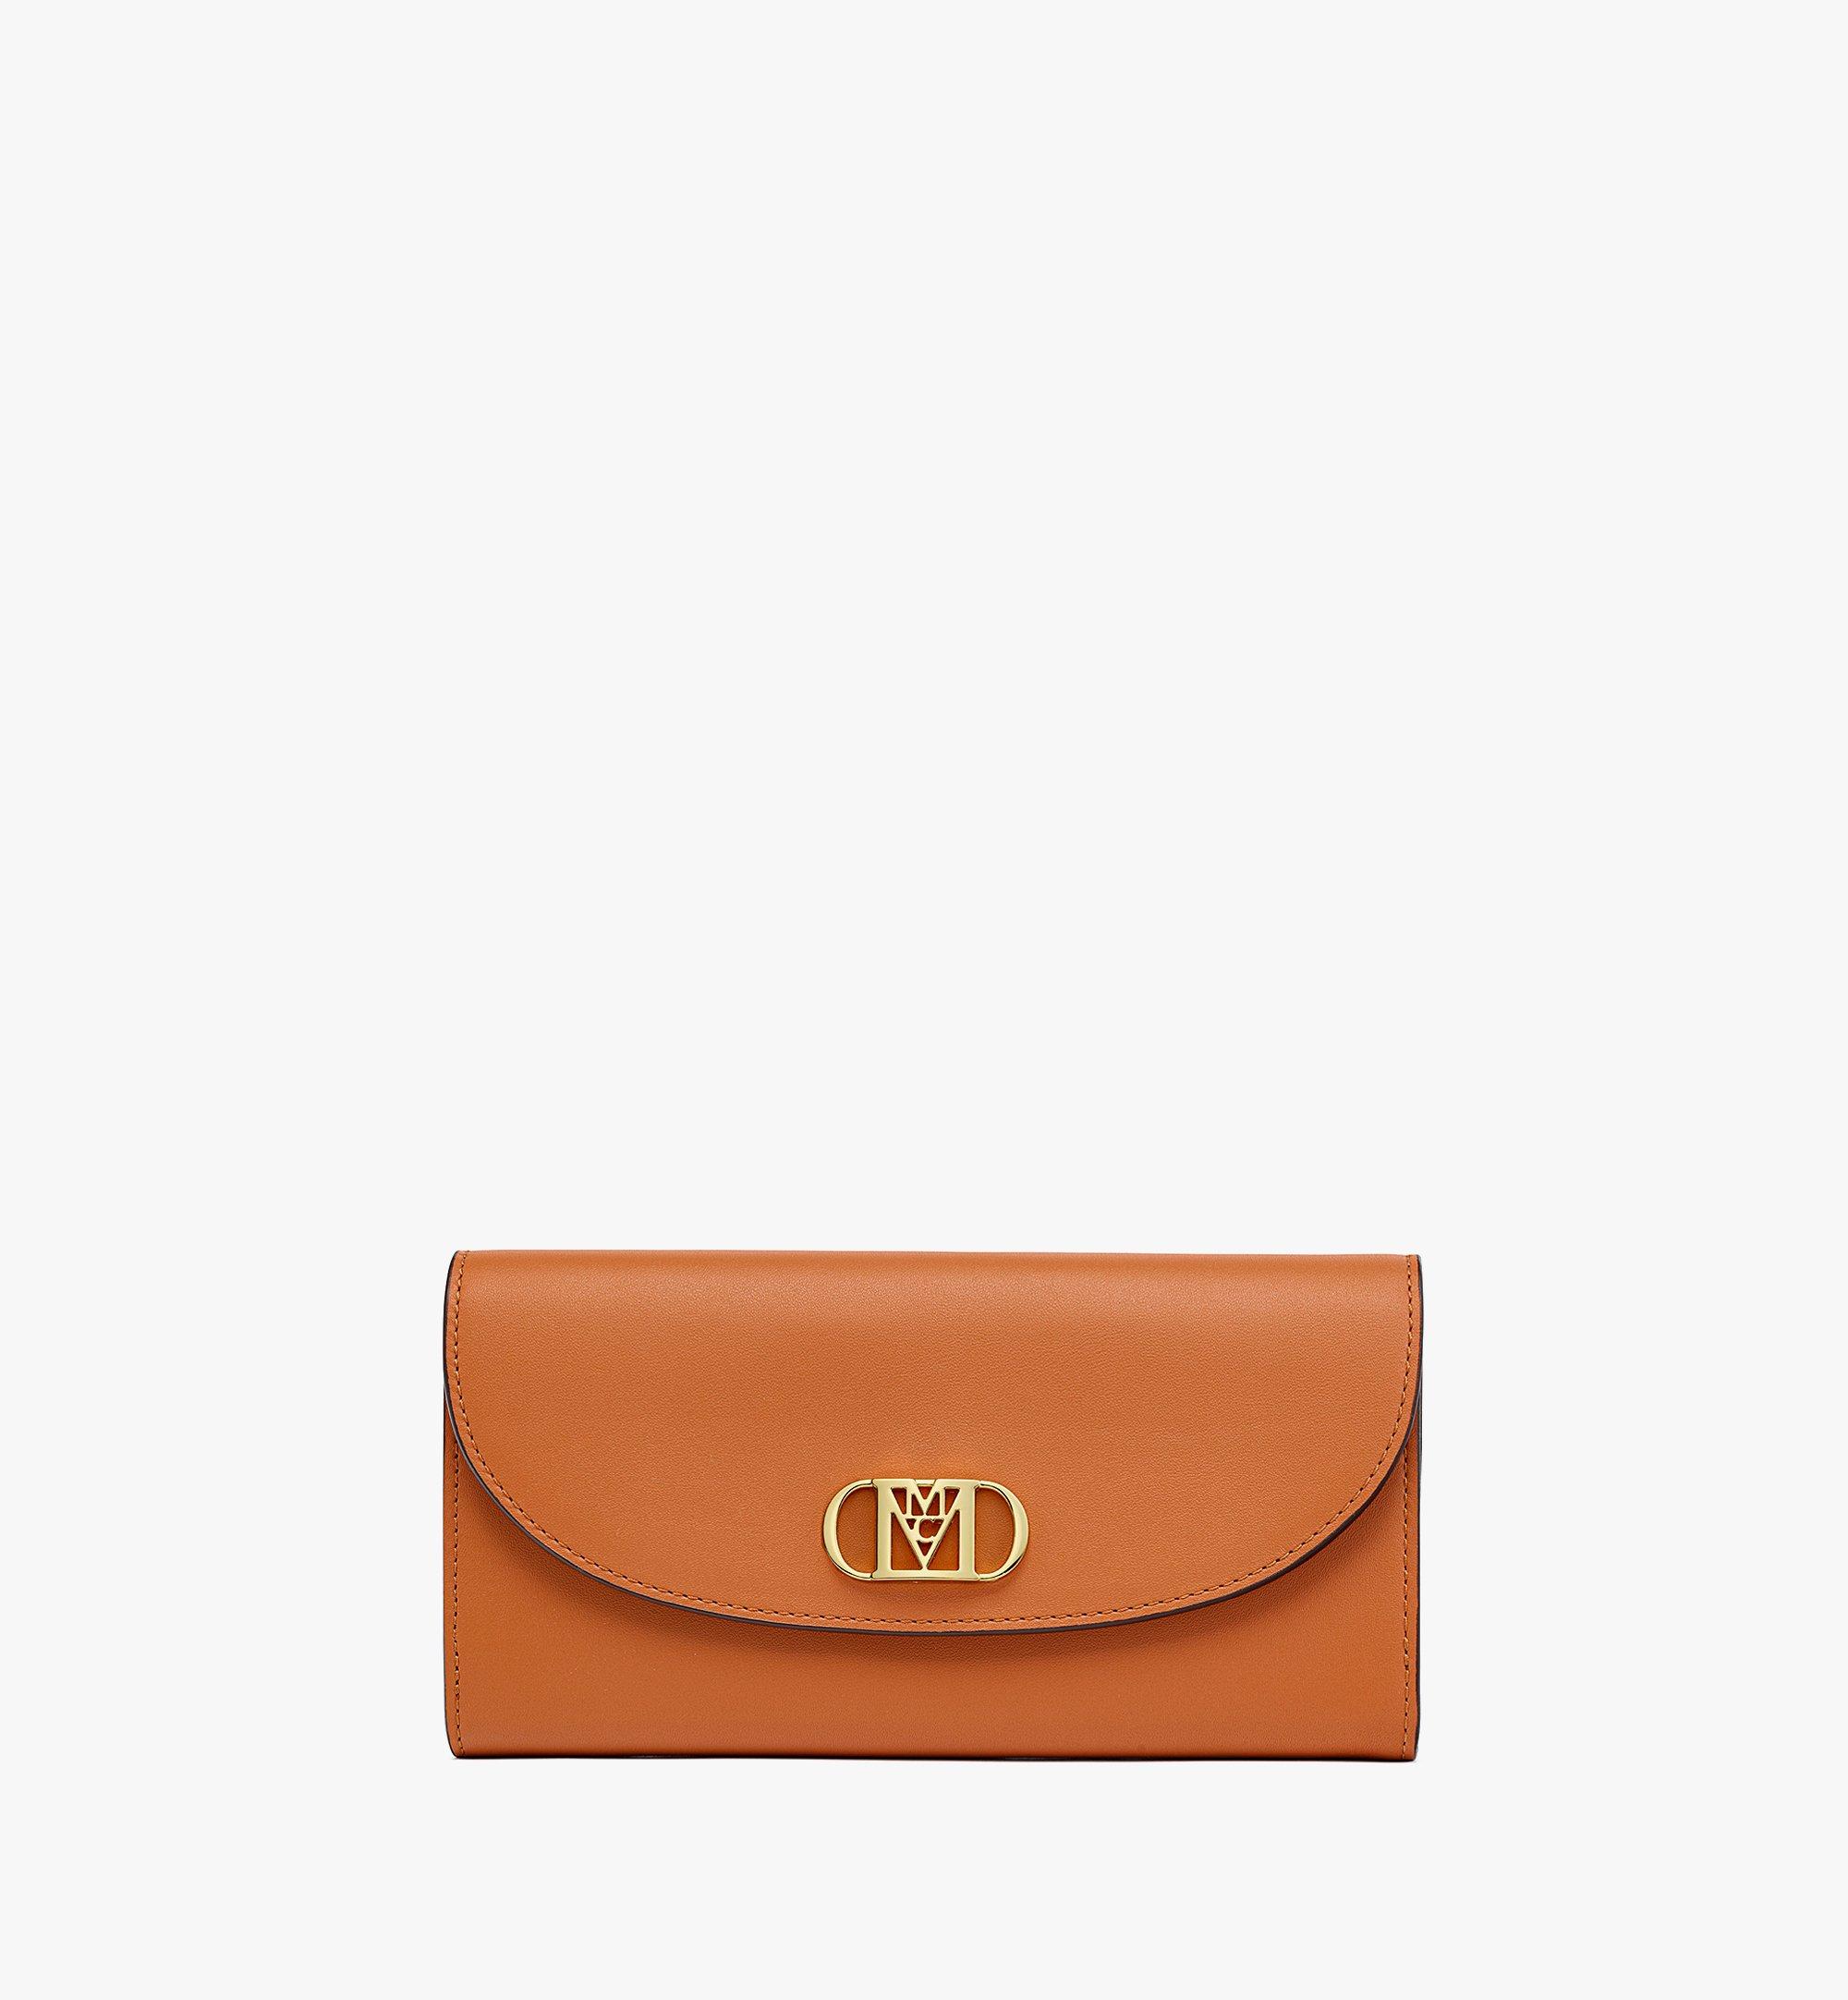 MCM Mode Travia Continental Wallet in Spanish Leather Cognac MYLDSLD01CO001 Alternate View 1